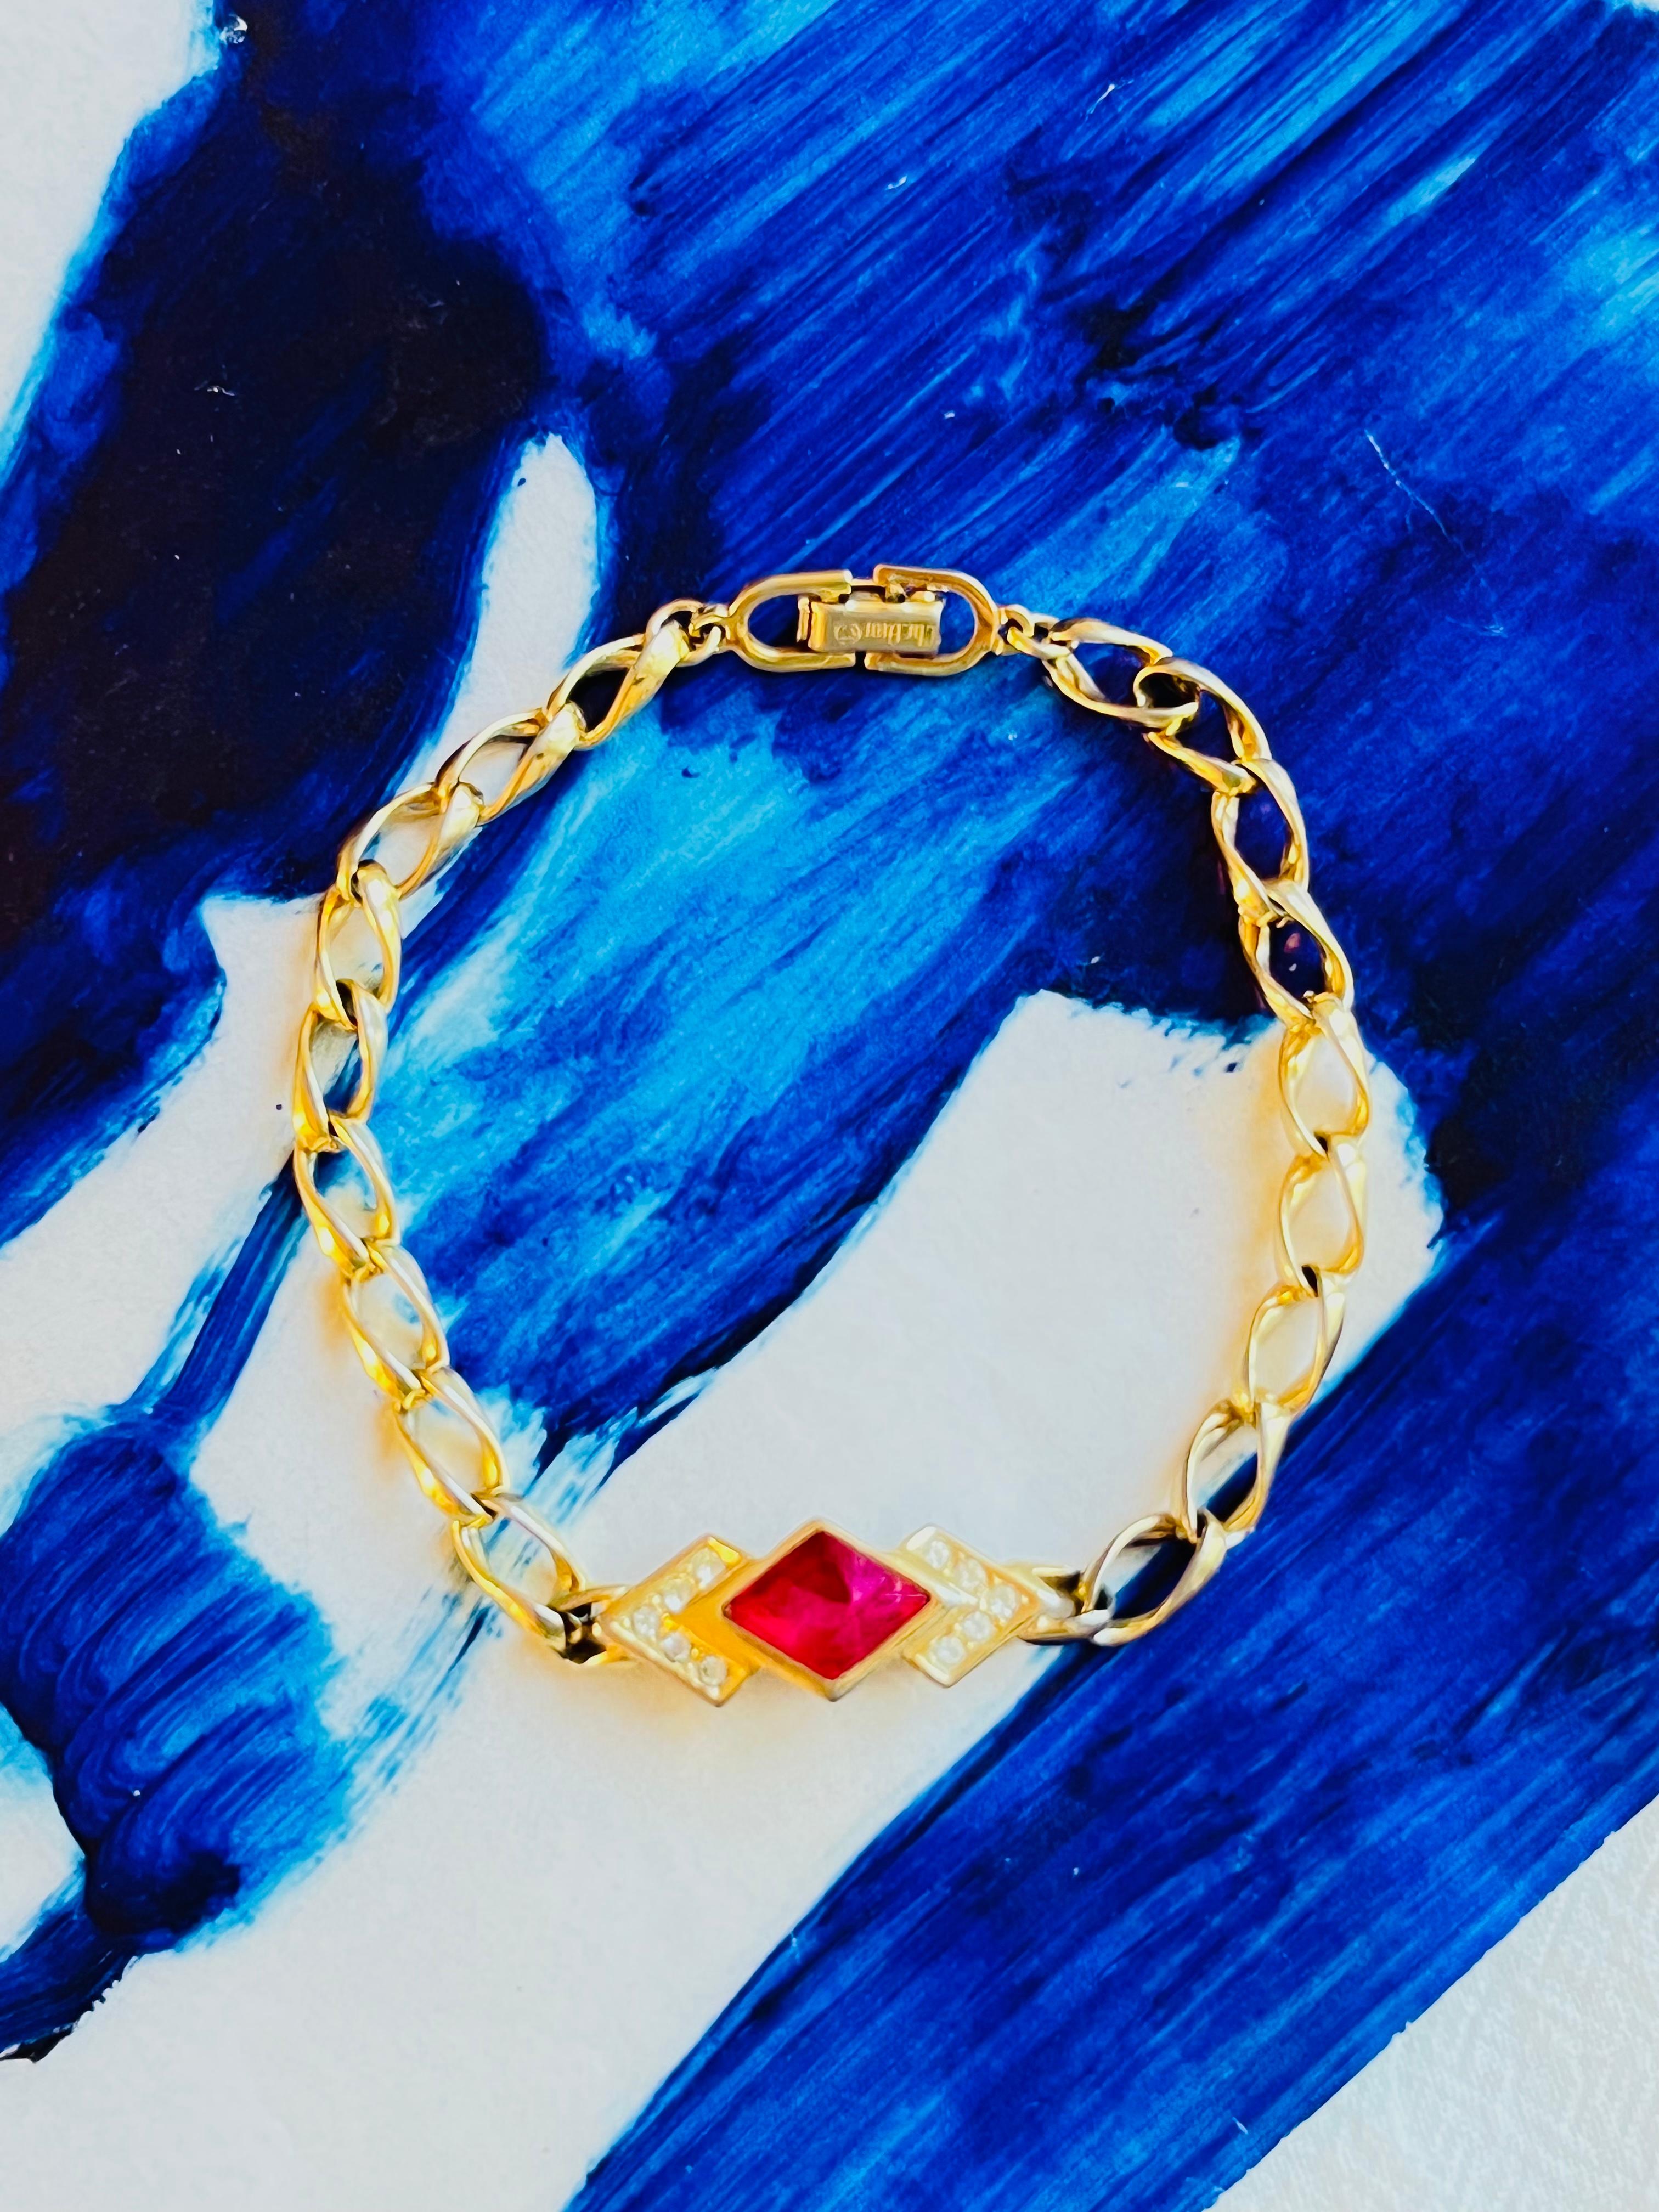 Christian Dior Vintage 1980s Gripoix Marble Red Ruby Diamond Crystals Interlock Bracelet, Gold Tone

A very beautiful bracelet by Chr. DIOR, signed at the back.

Very good condition. Some colour loss. Front side is very good condition. 100%